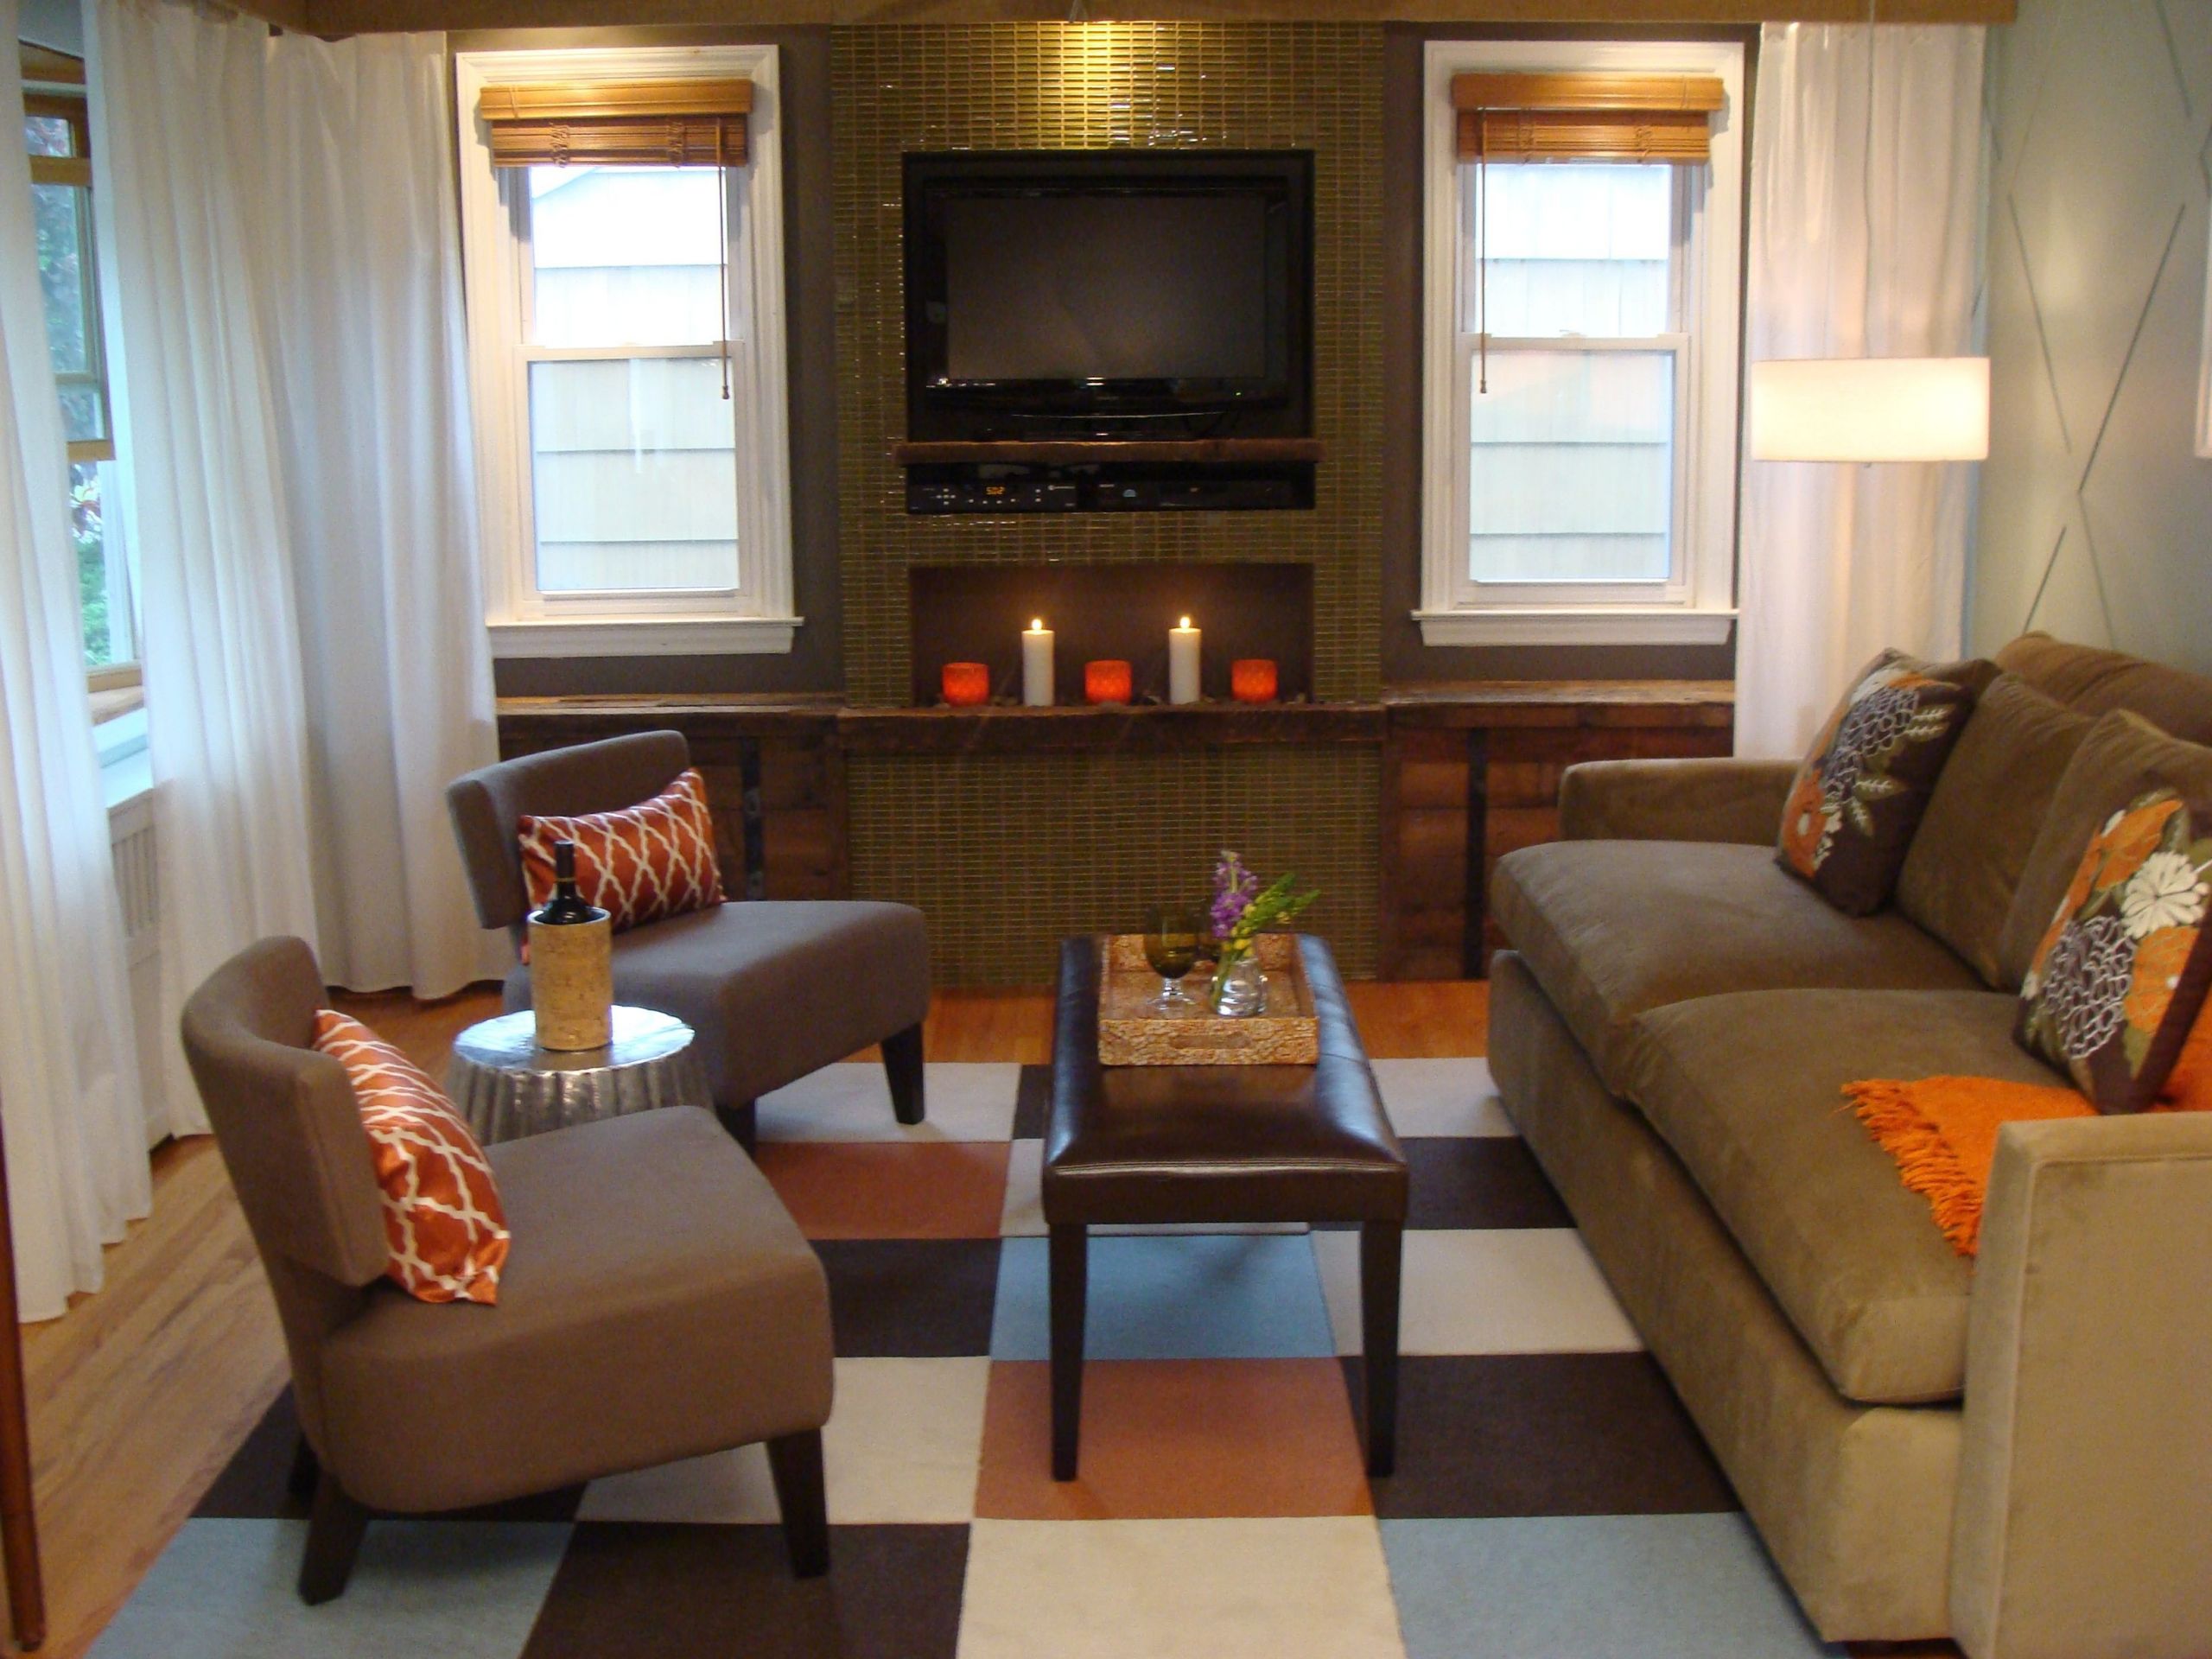 Small Living Room Furniture Layout
 Living Room Furniture Layout Ideas for Different Room